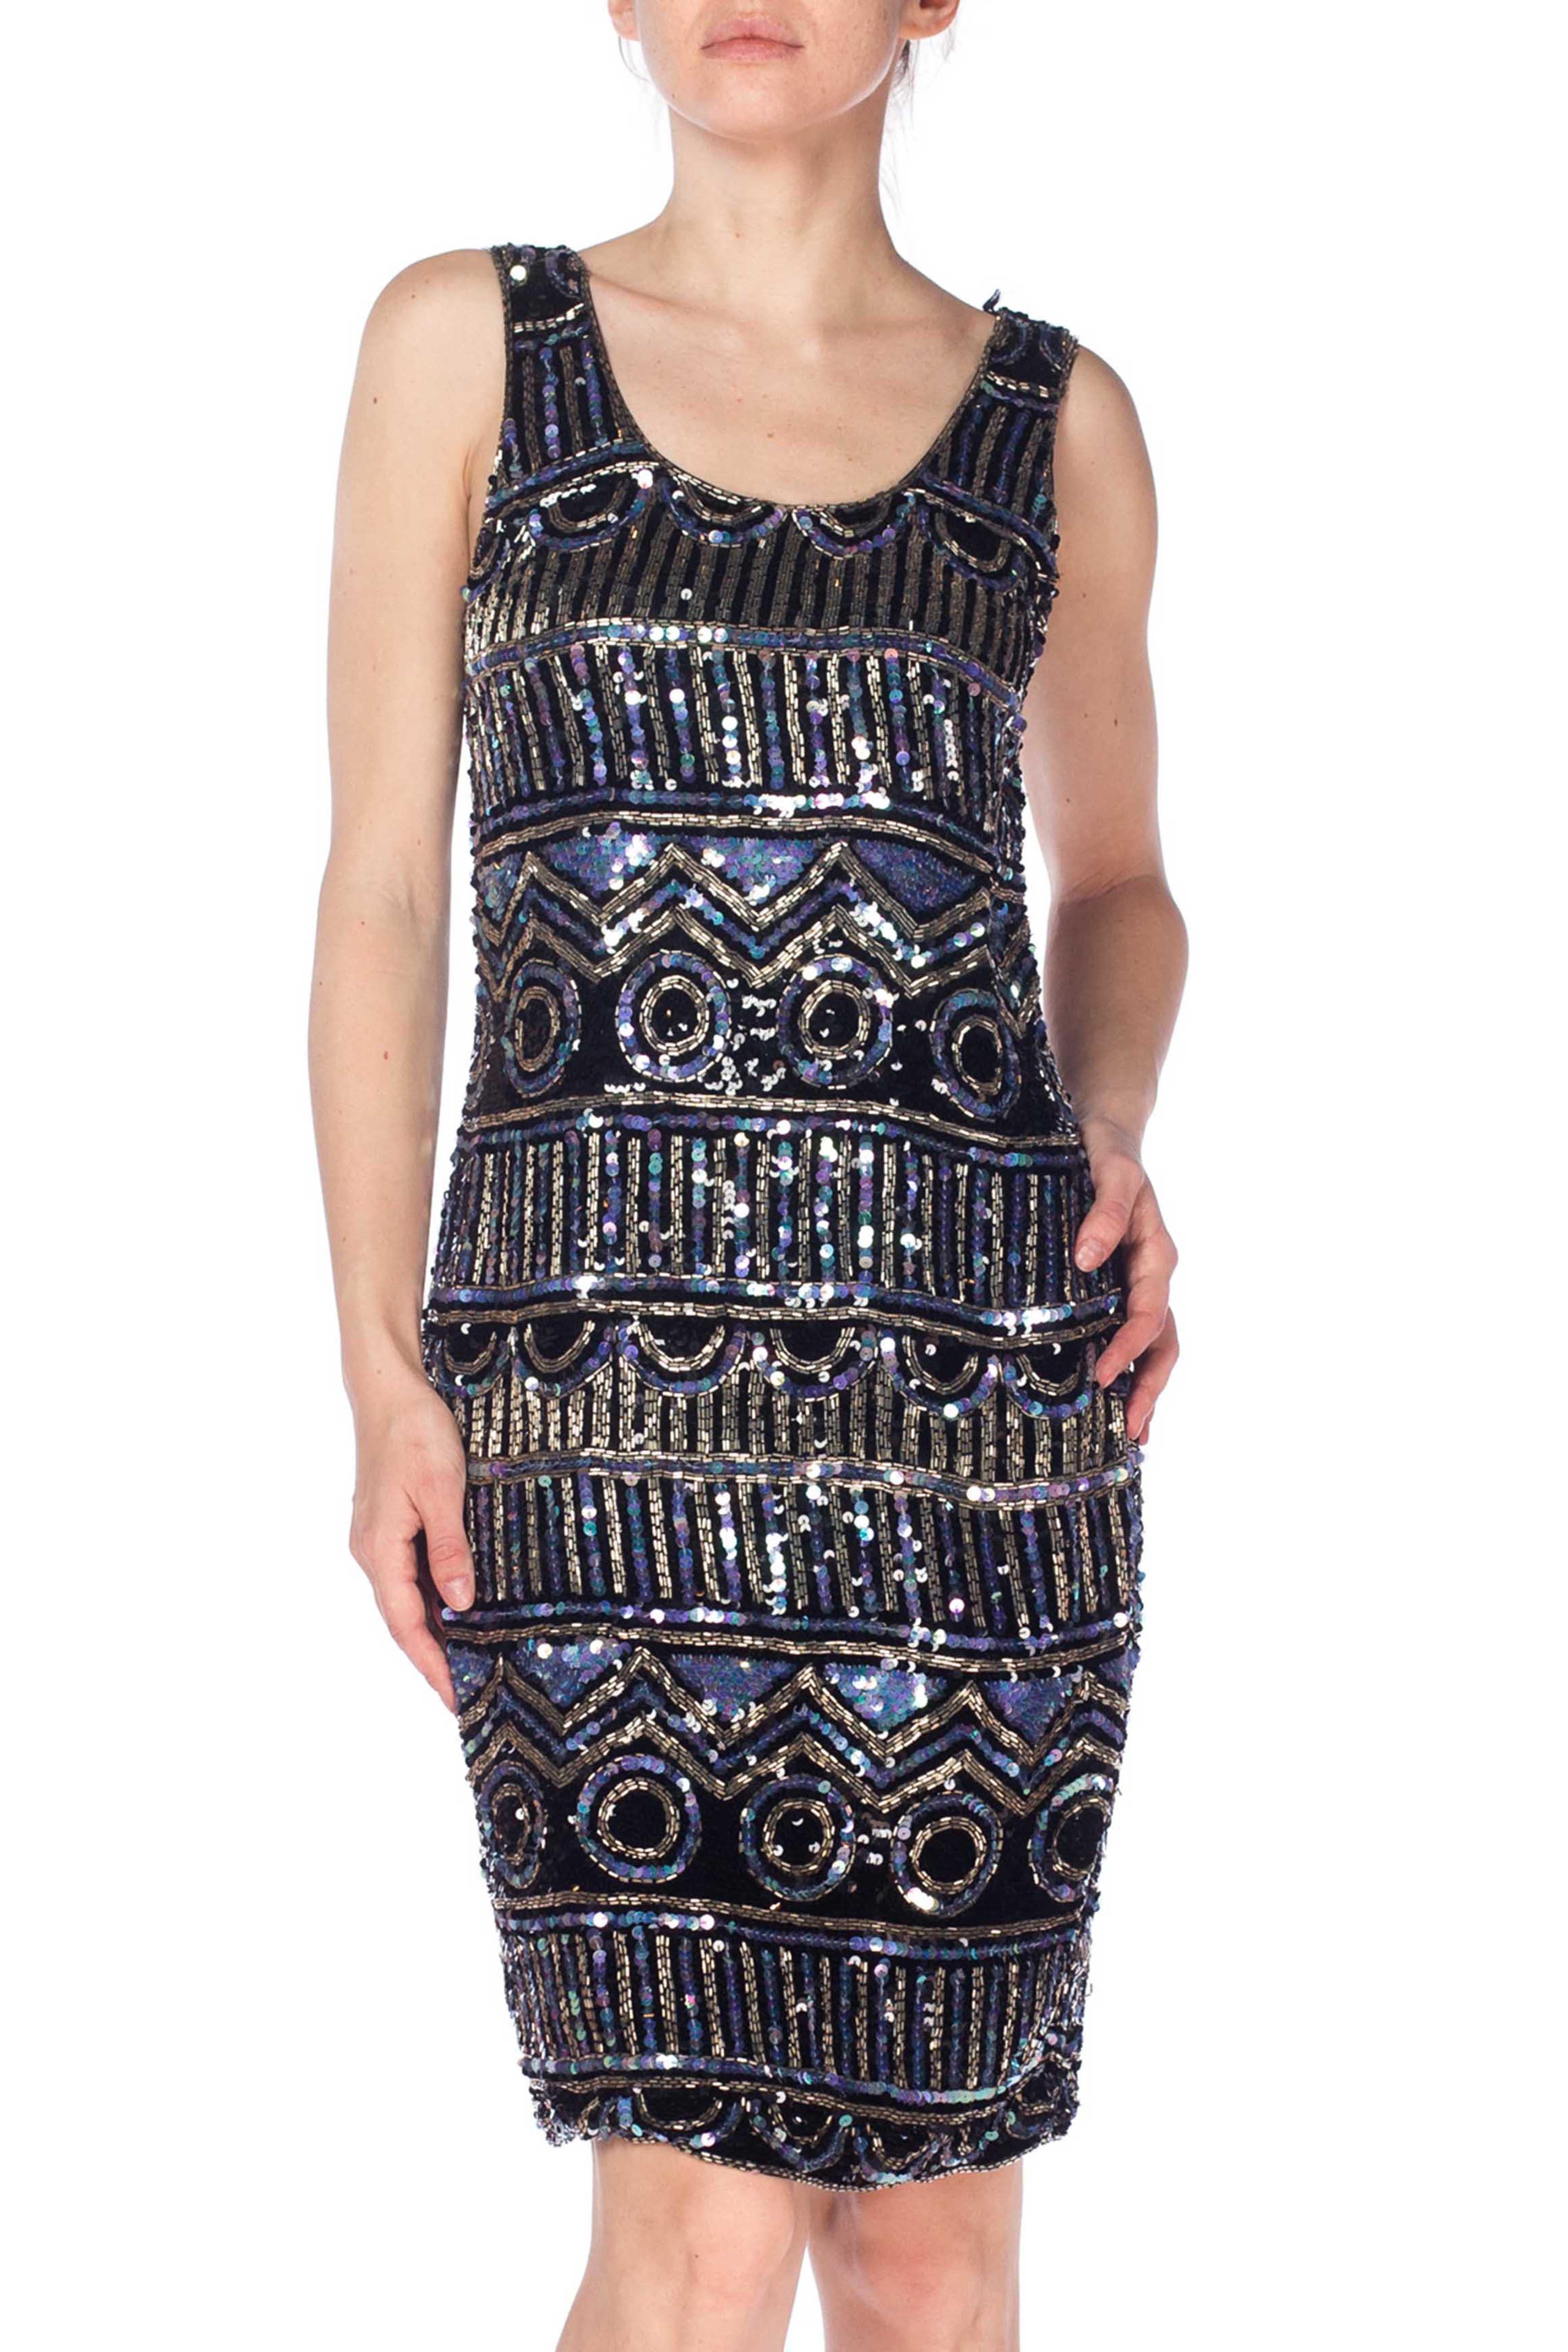 Lined in rayon, has a few loose beads but otherwise in great shape 1990S Black Silk Chiffon Cocktail Dress  Fully Beaded In Silver, Blue, And Sequins 